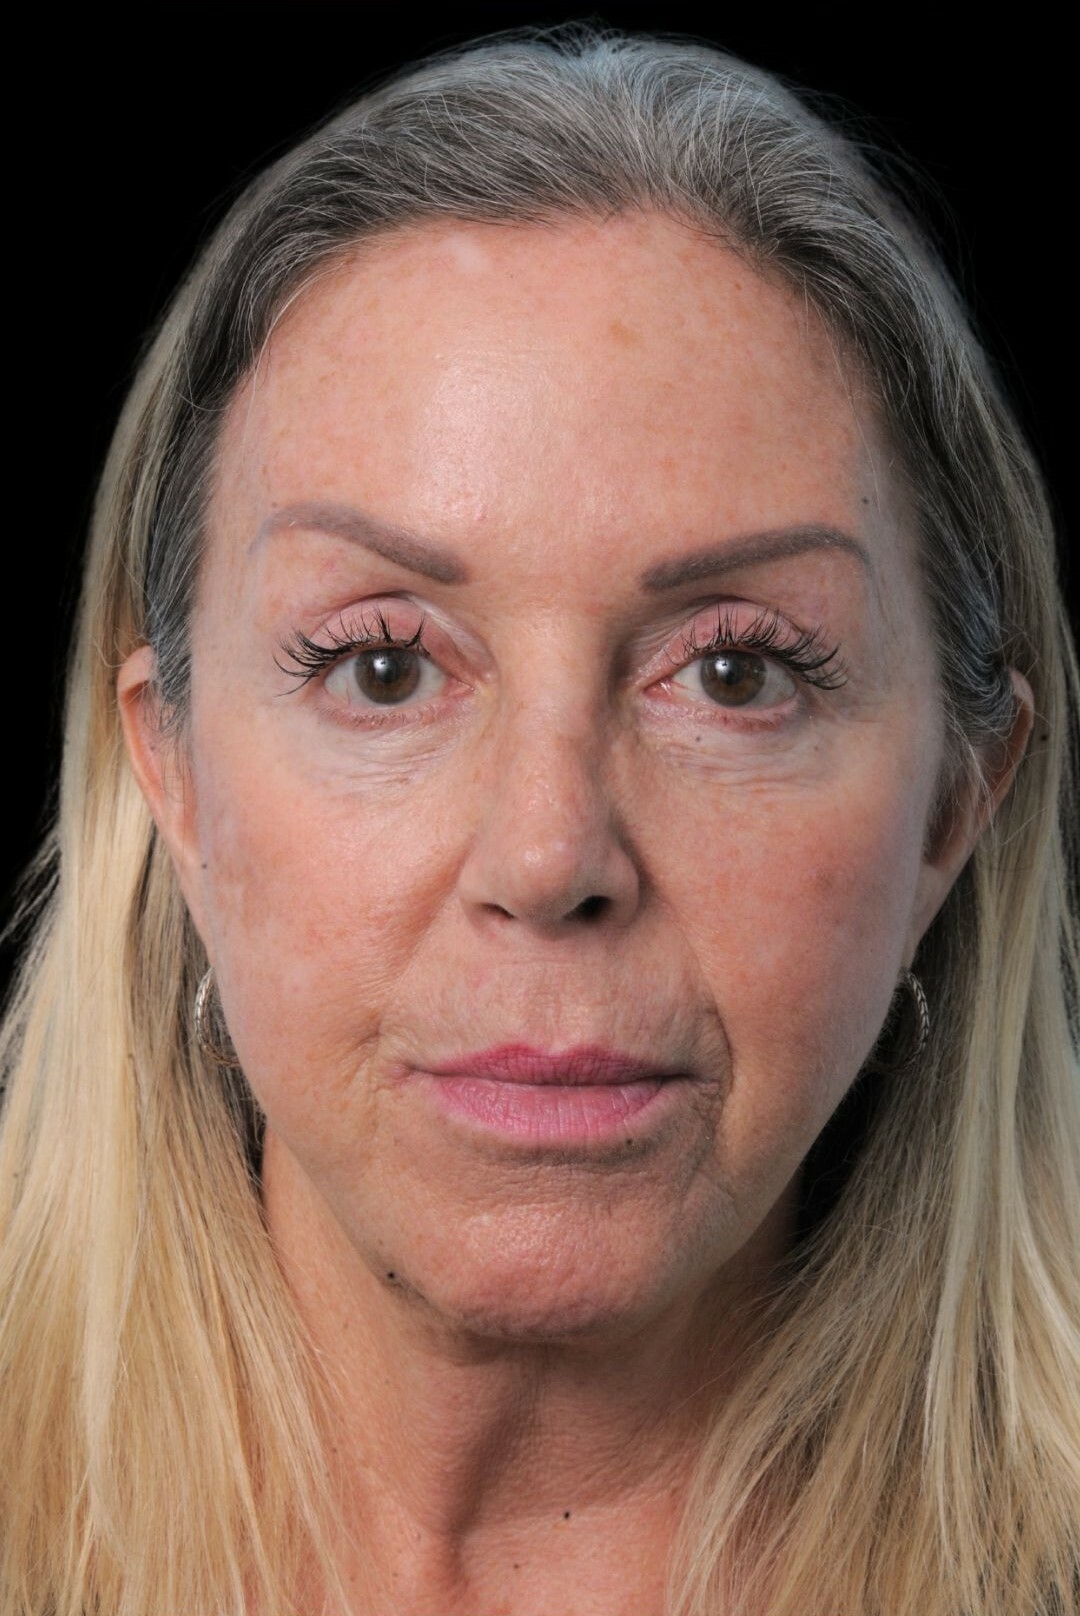 Photo of the patient’s face after the Rhinoplasty surgery. Patient 17 - Set 2